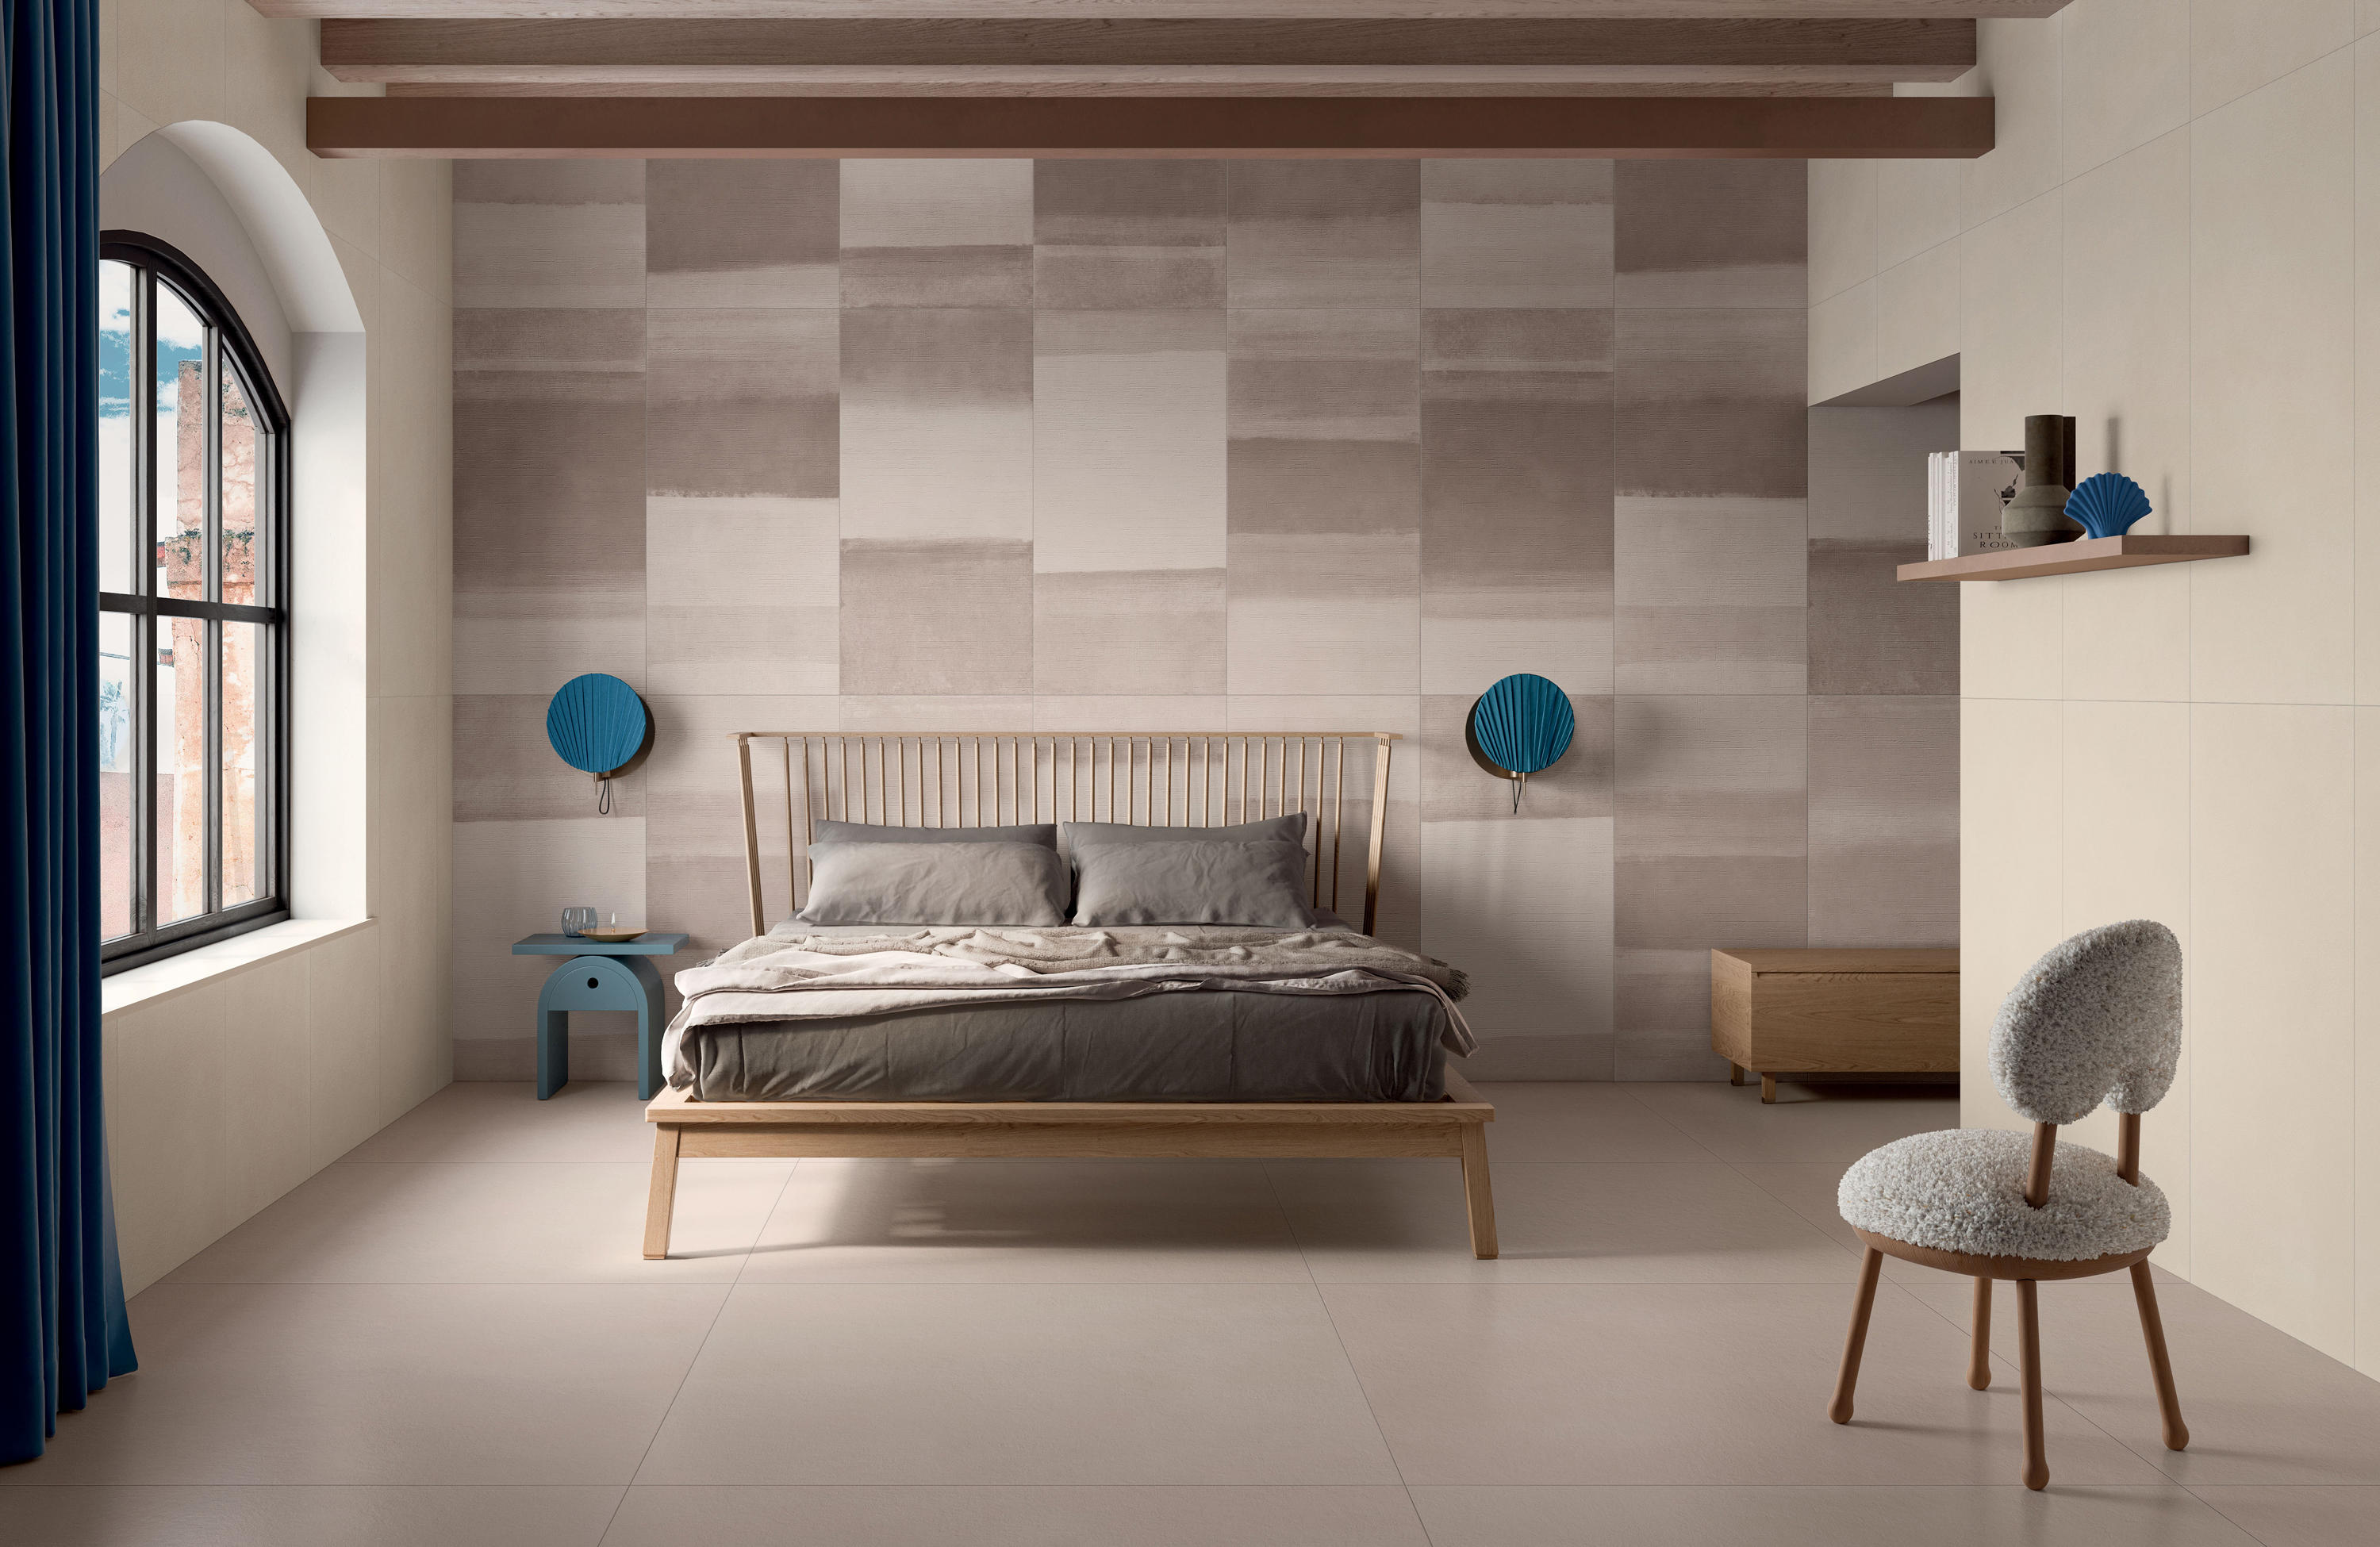 overclay-bedroom-1-white-grey-petracold-fam-g-arcit18.jpg